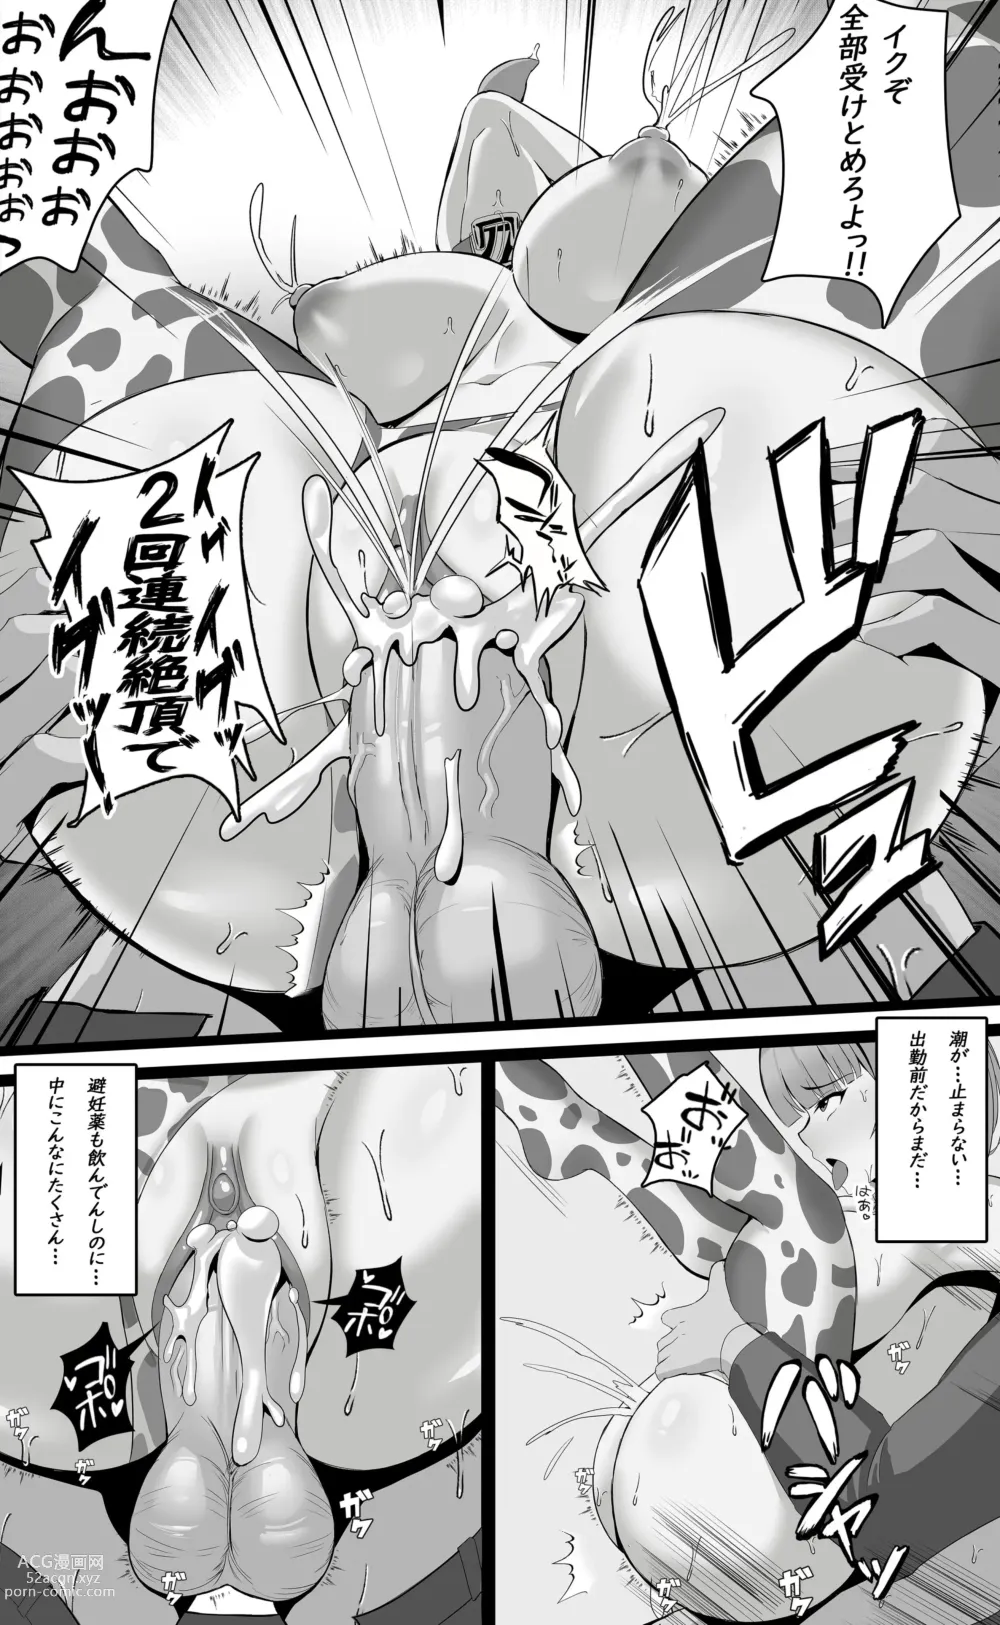 Page 8 of doujinshi Milking delivery girl, please review it -2- (uncensored)